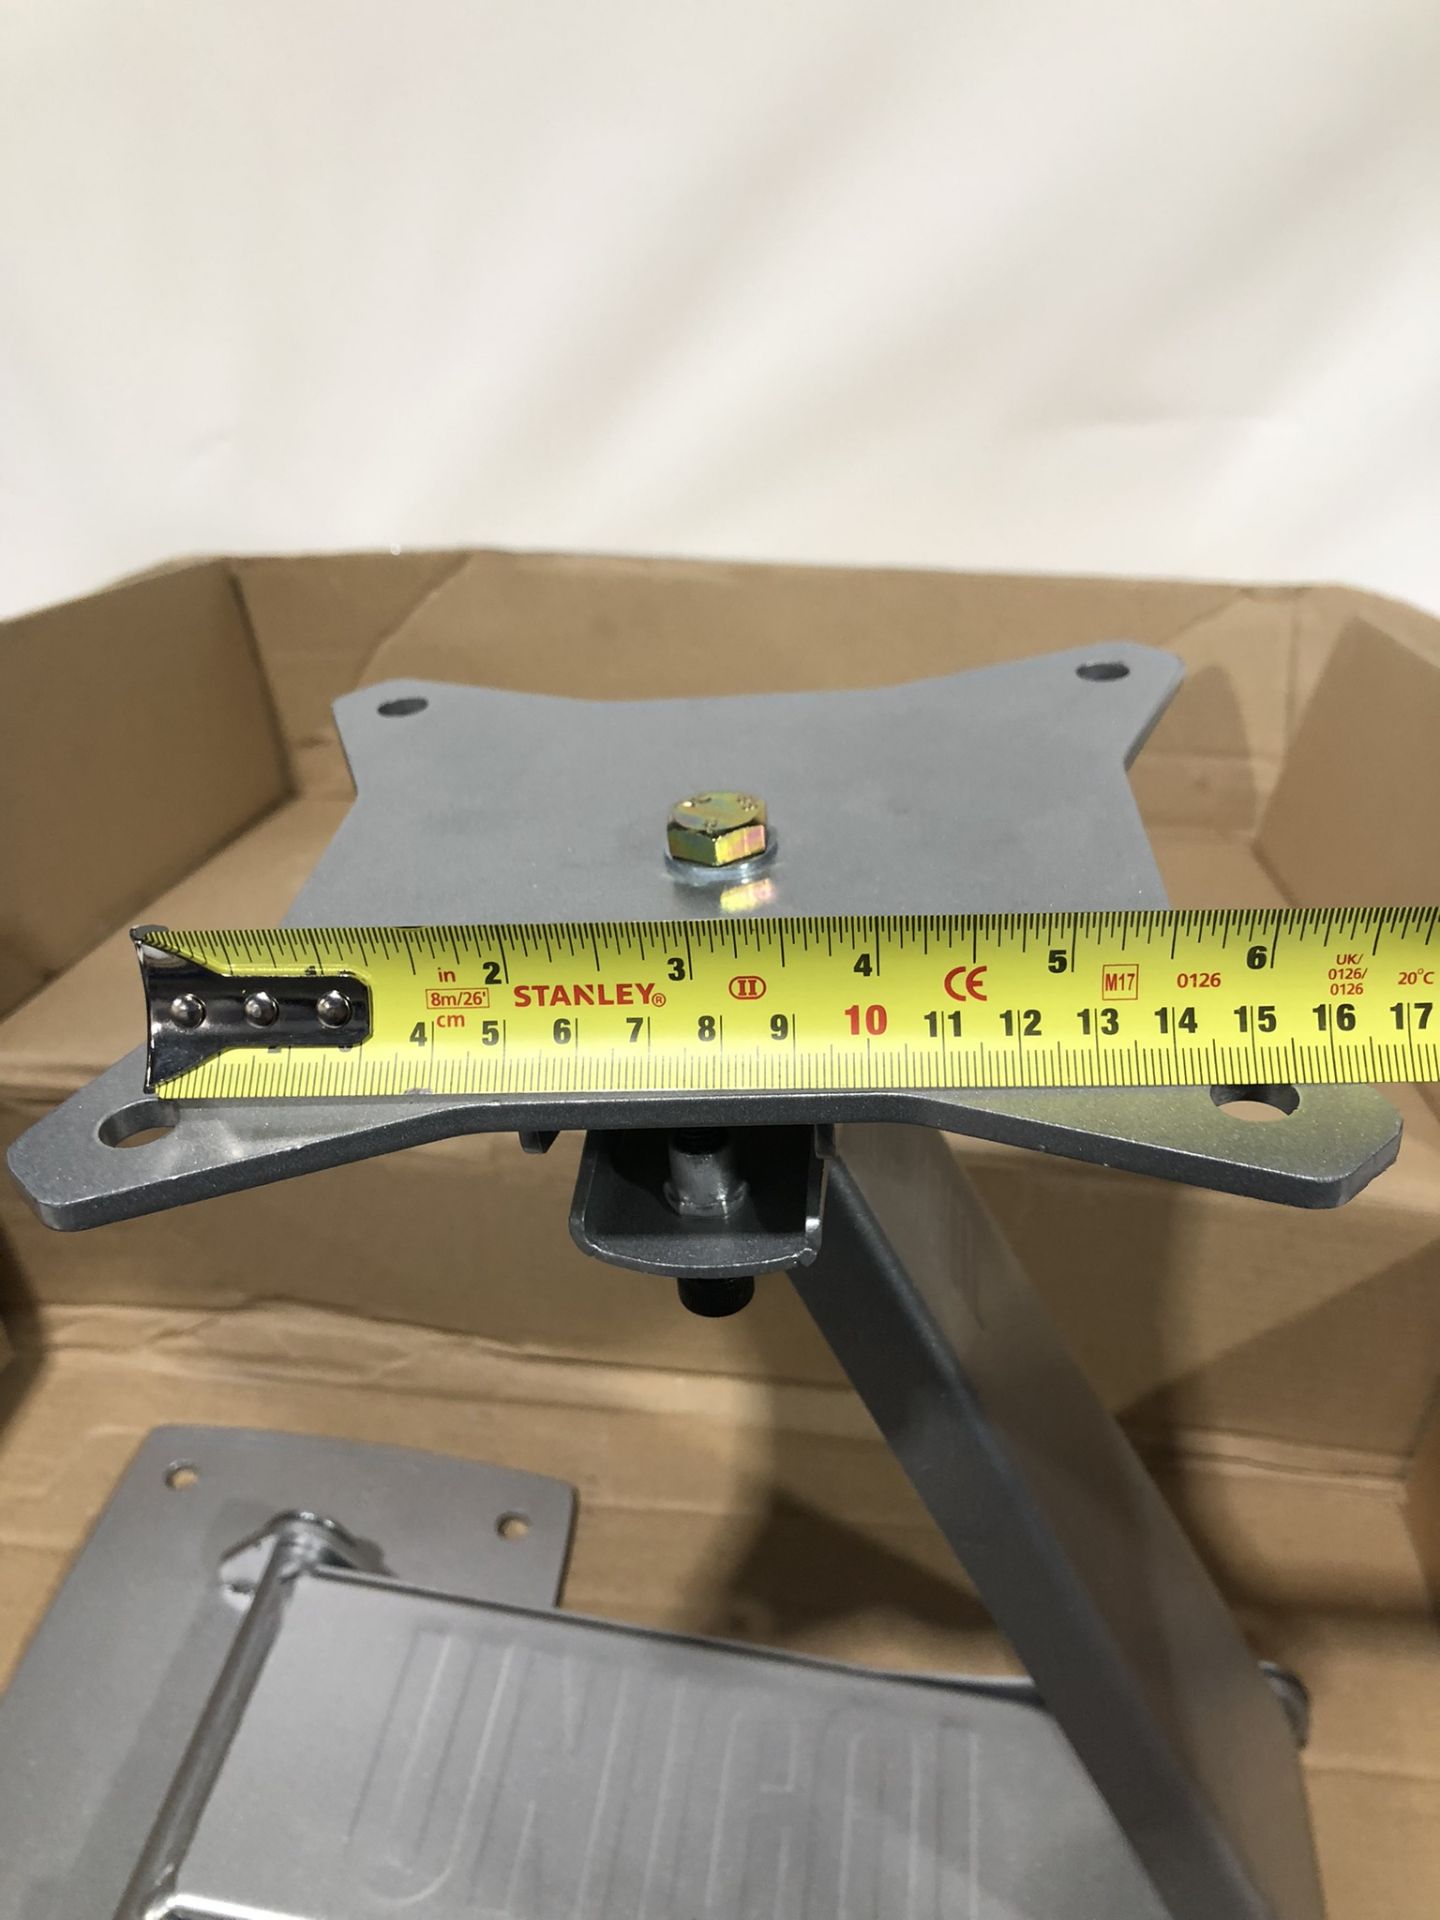 Unicol TV Arm. 150mm VESA centres Condition: New New, box damaged, fits VESA centres of 150mm or a - Image 3 of 4